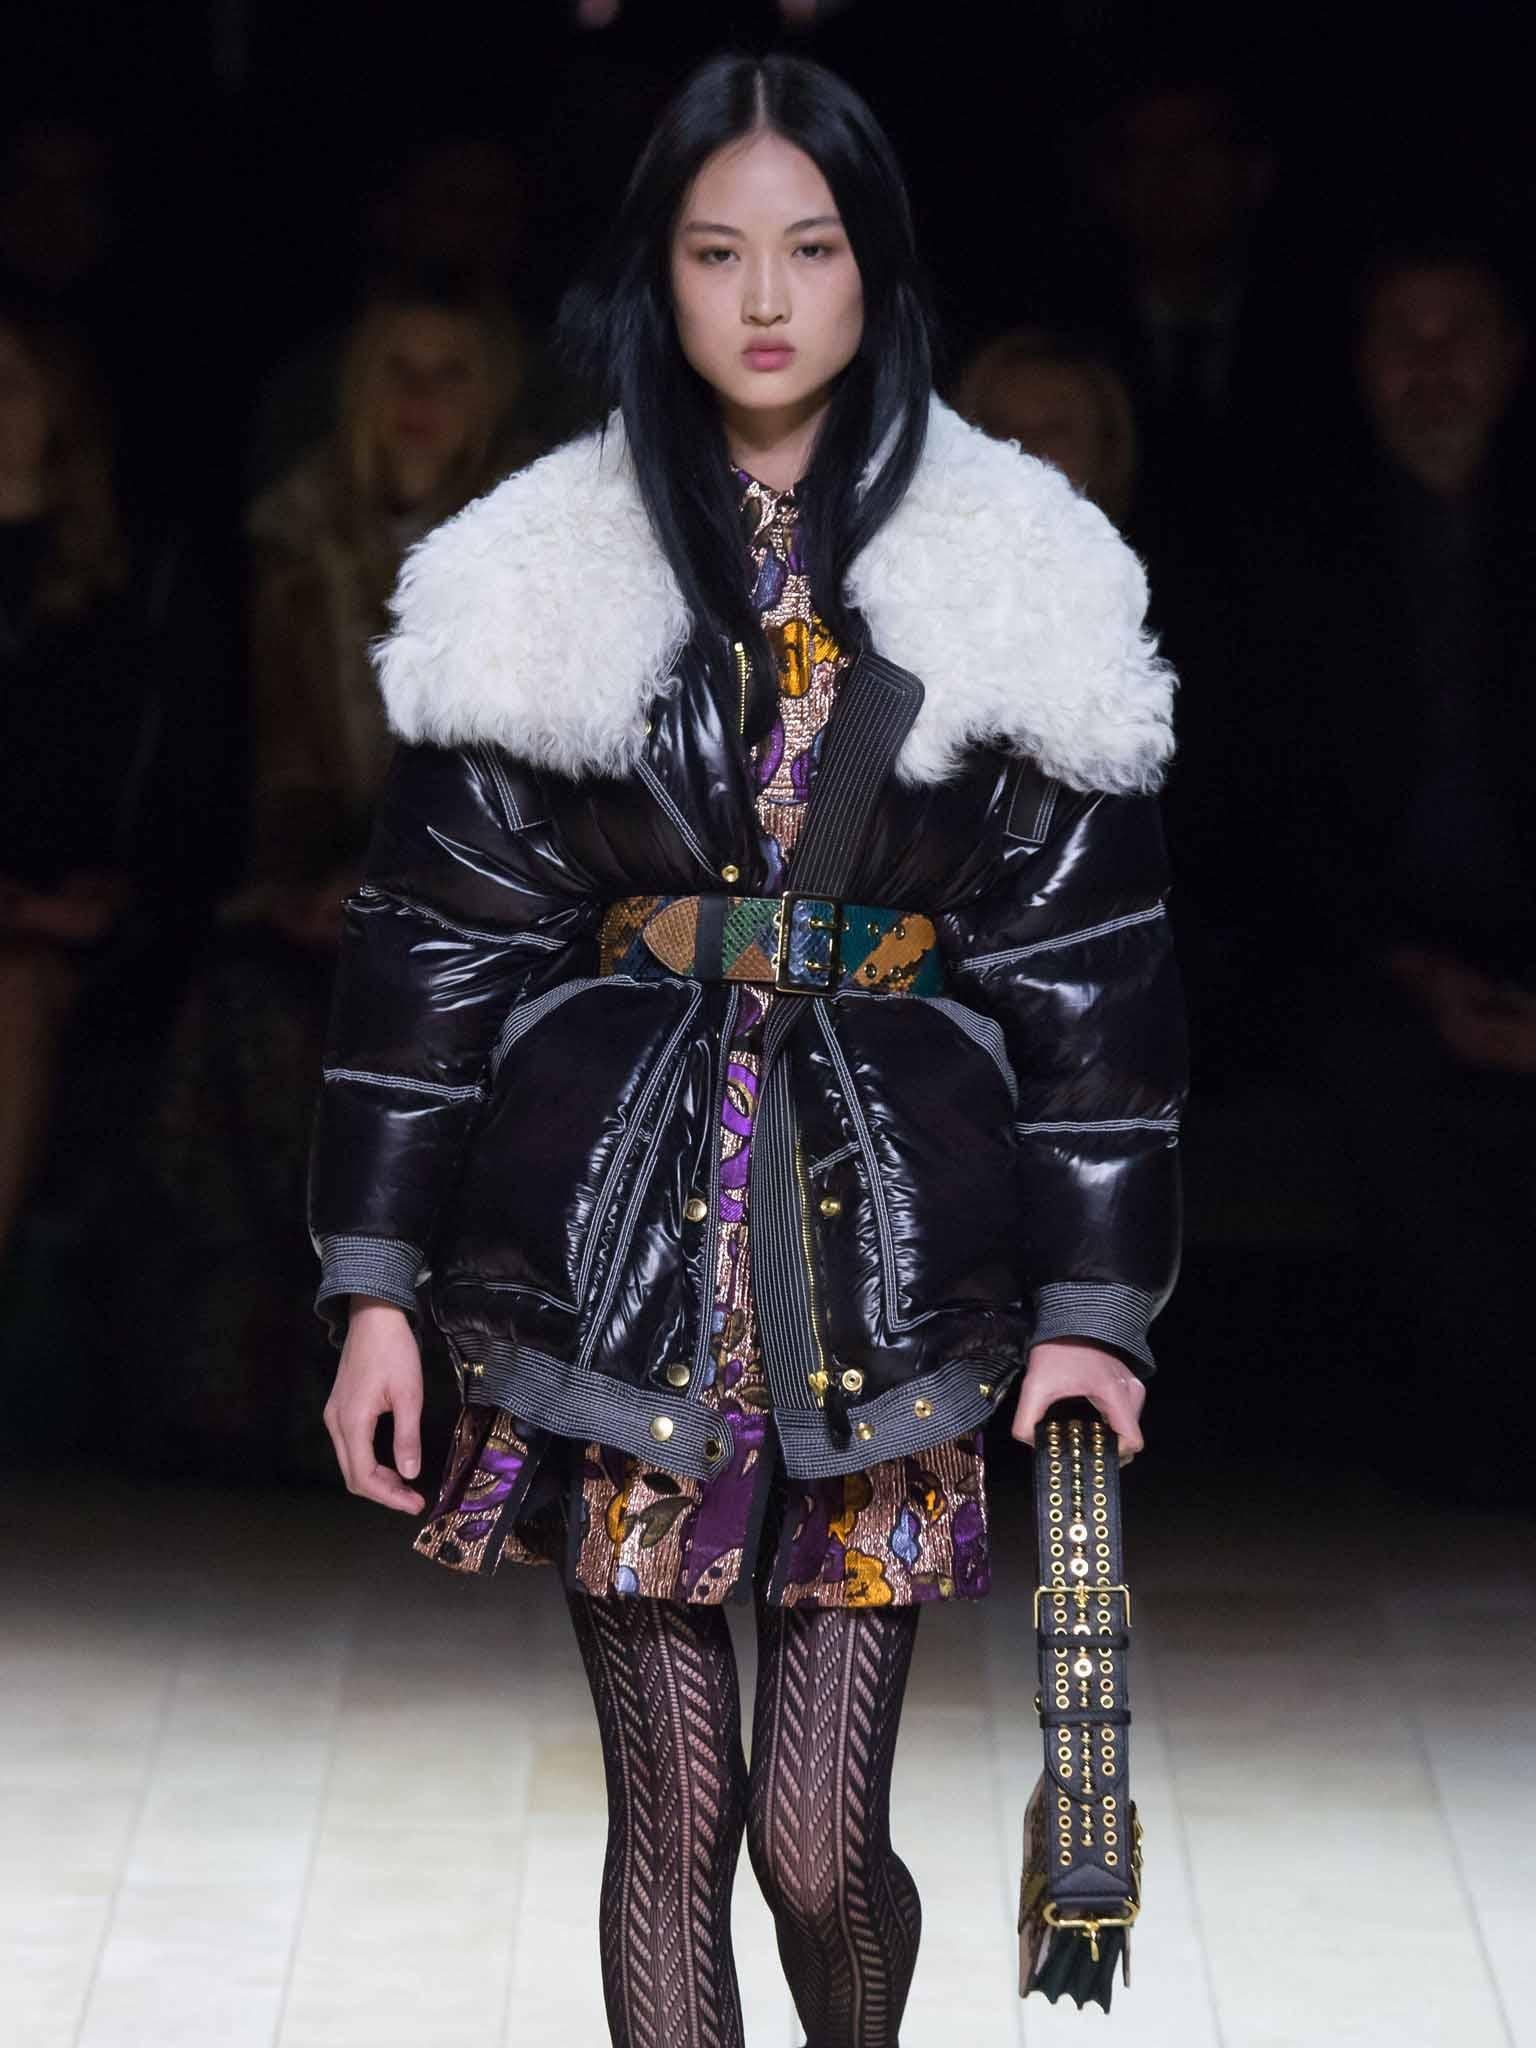 Shear delight: How to master this season's shearling trend